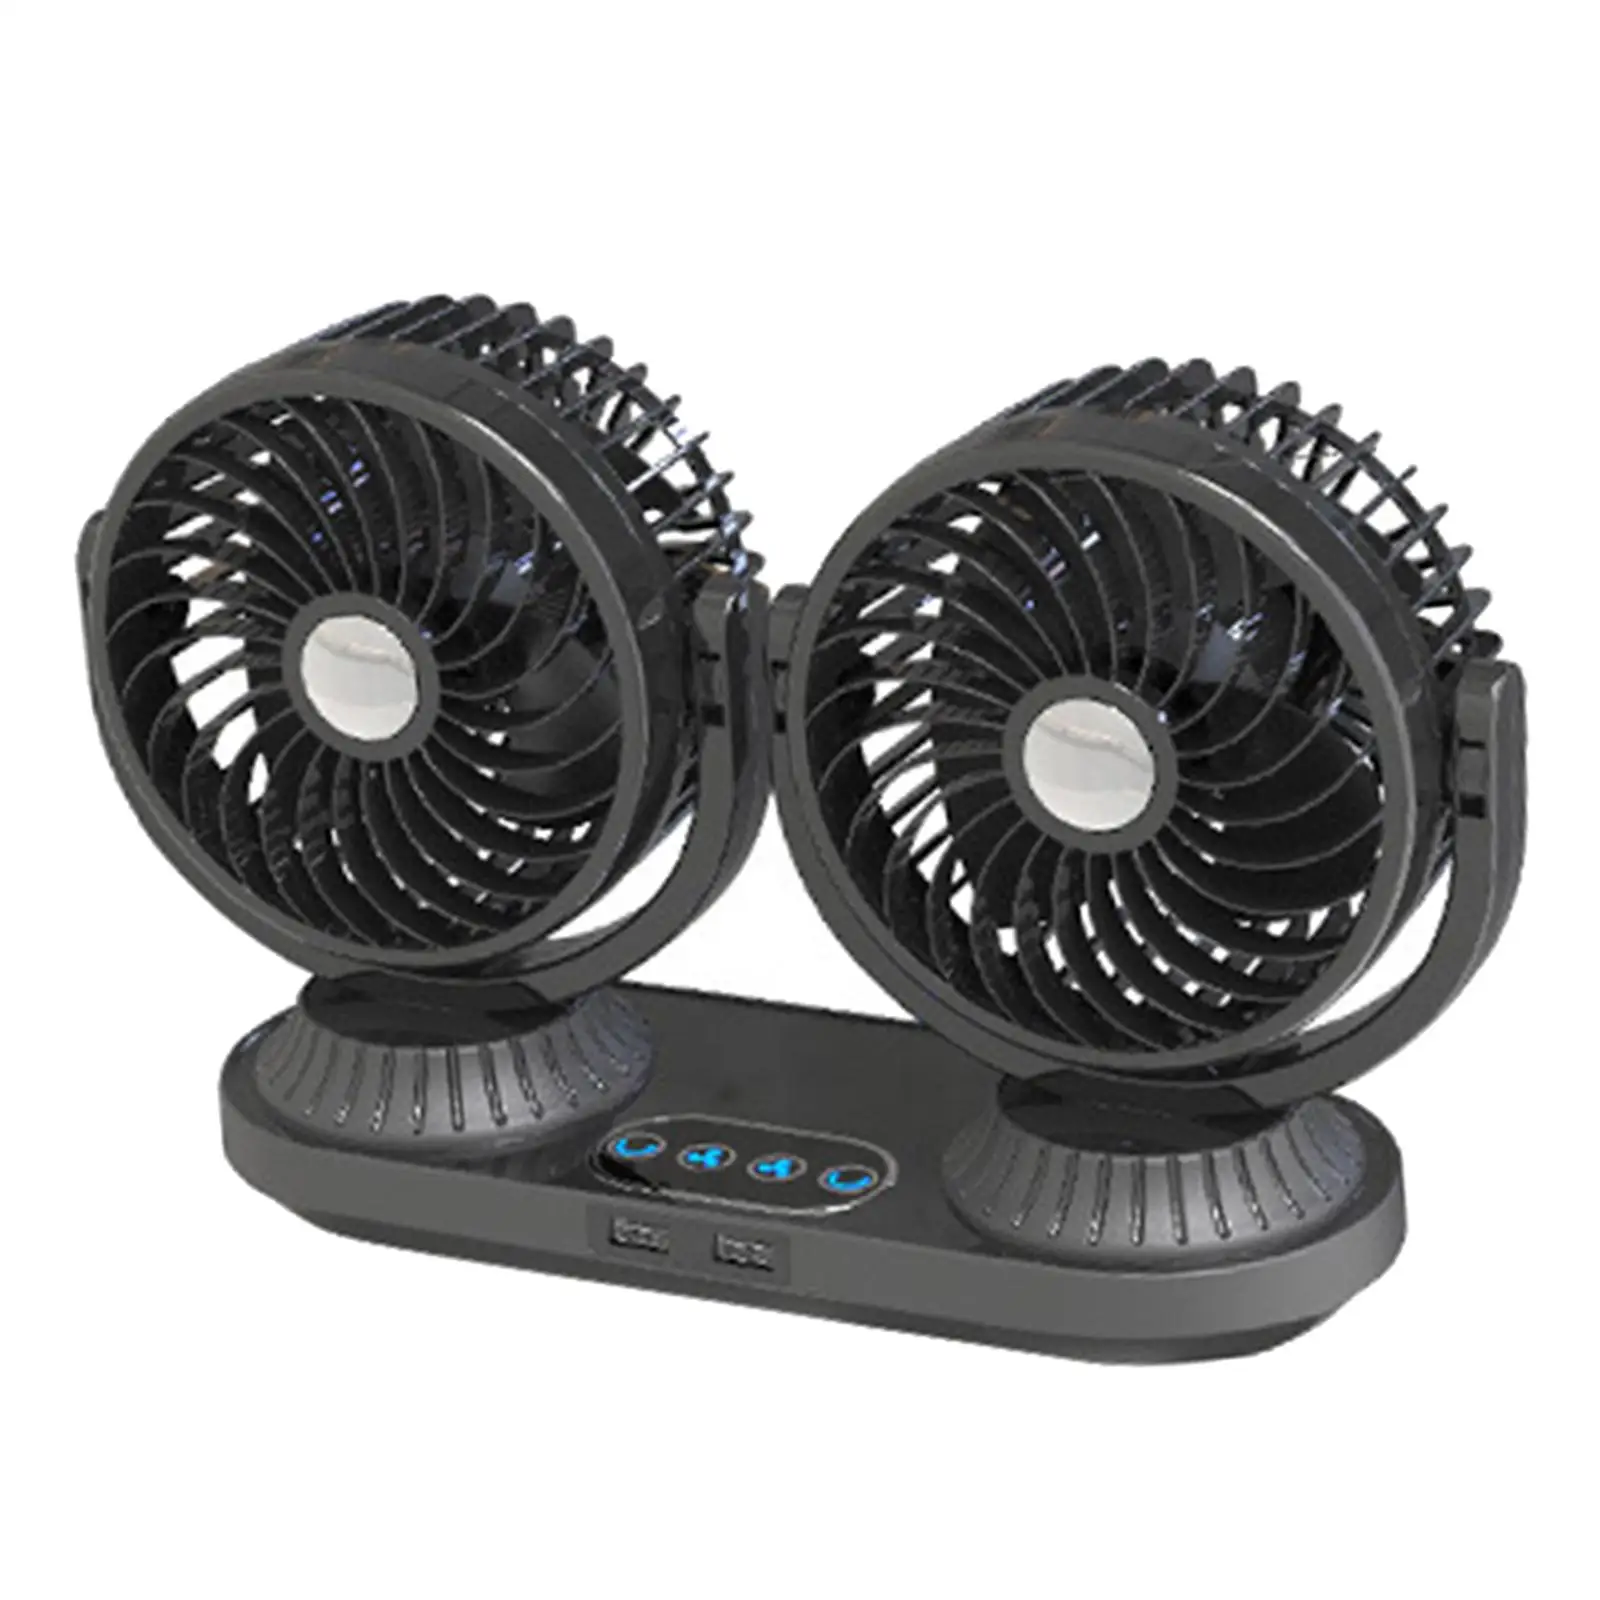 Dual Heads Car Fan 12V 24V Universal Electric 360 Left and Right Touch Adjustment Air Circulation Fan Dashboard Air Cooler